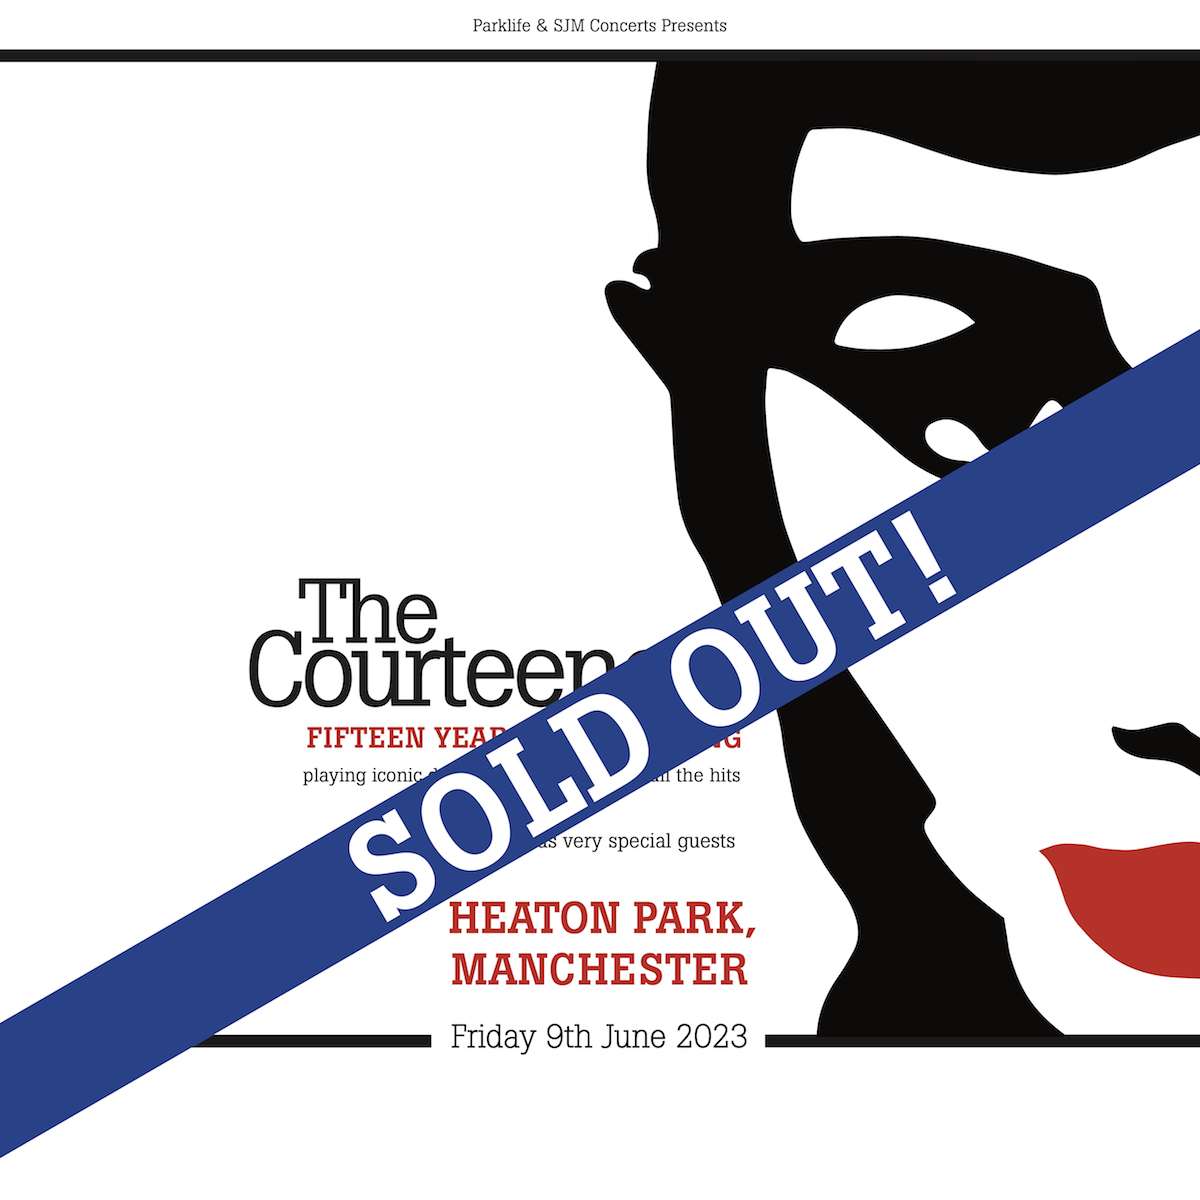 COURTEENERS landmark Heaton Park return sells out in less than 8 hours